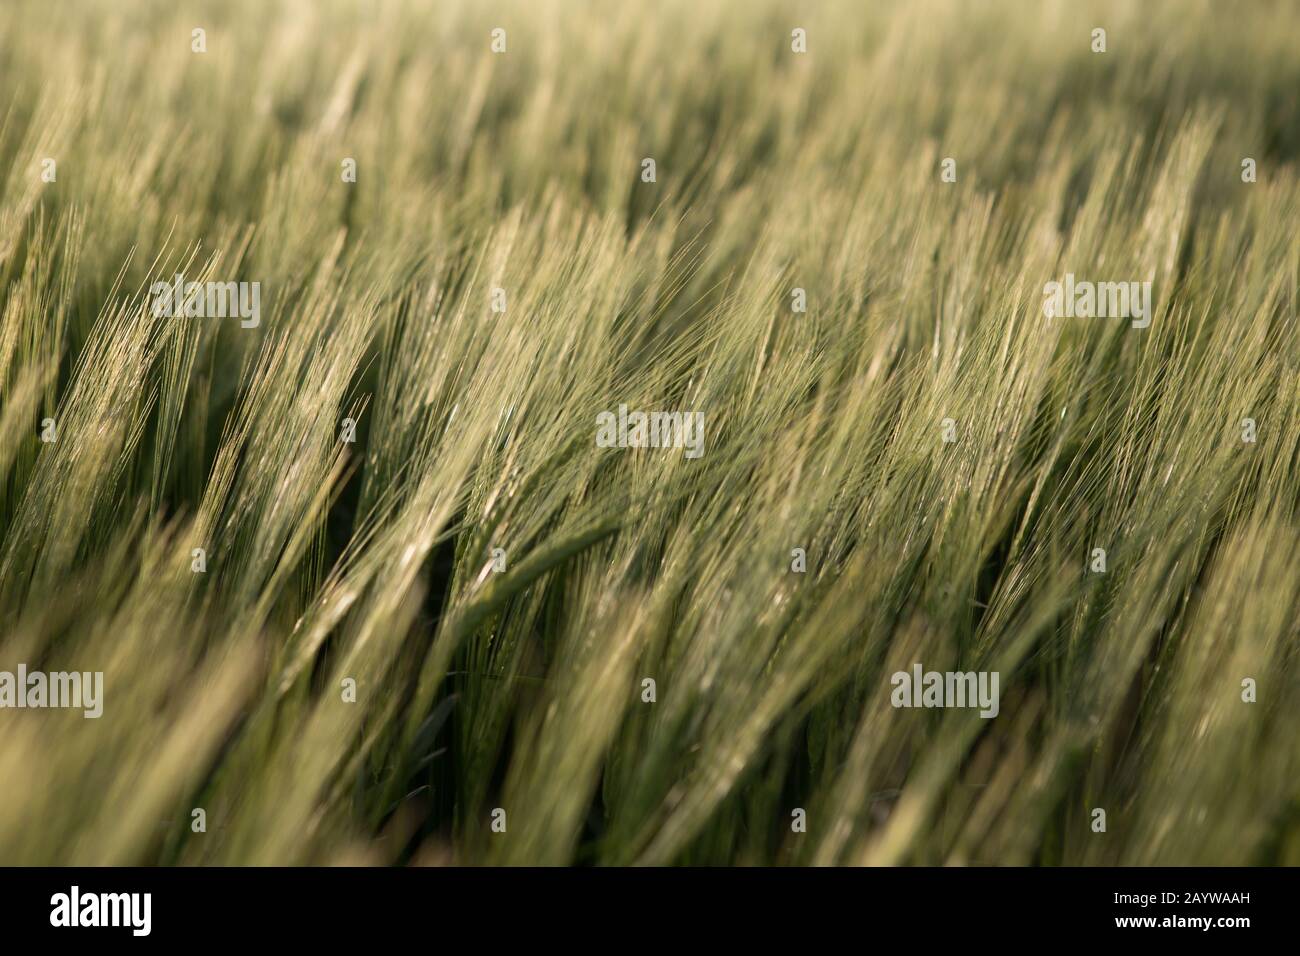 Wheat spikelets leaning in the breeze at sunset, St. Andrews, Fife, Scotland. Stock Photo